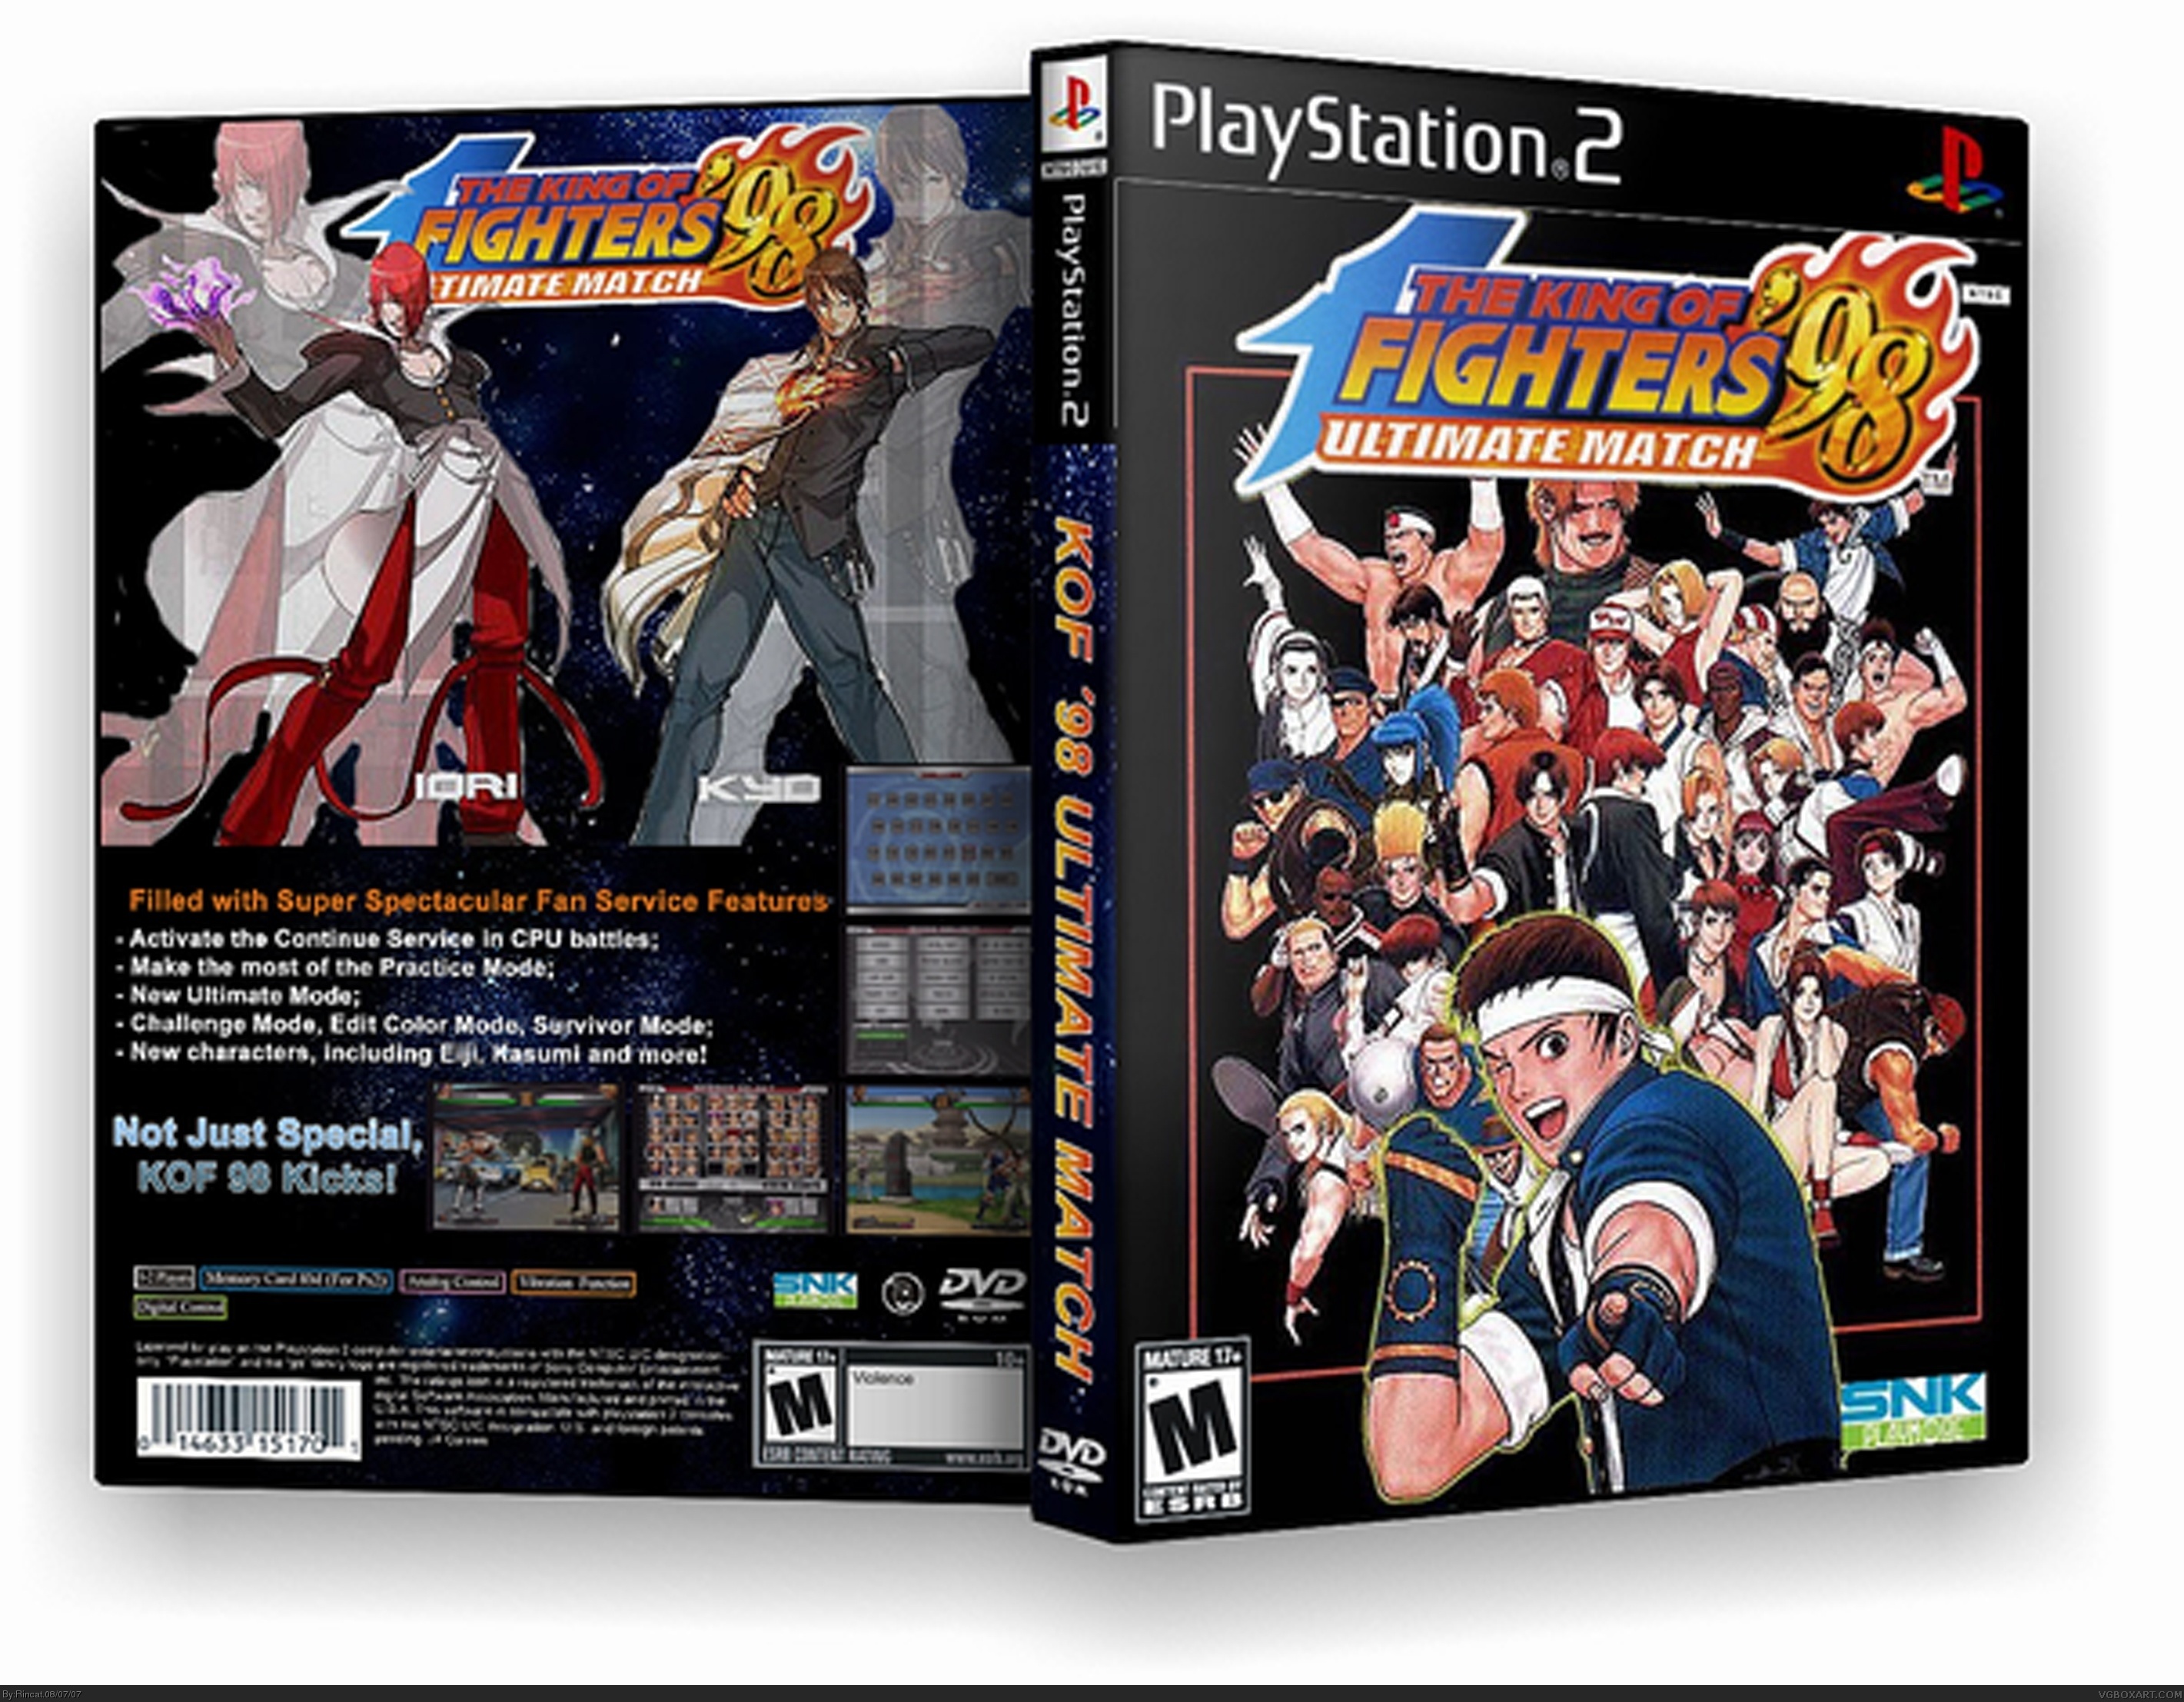 The King of Fighters 98 Ultimate Match box cover